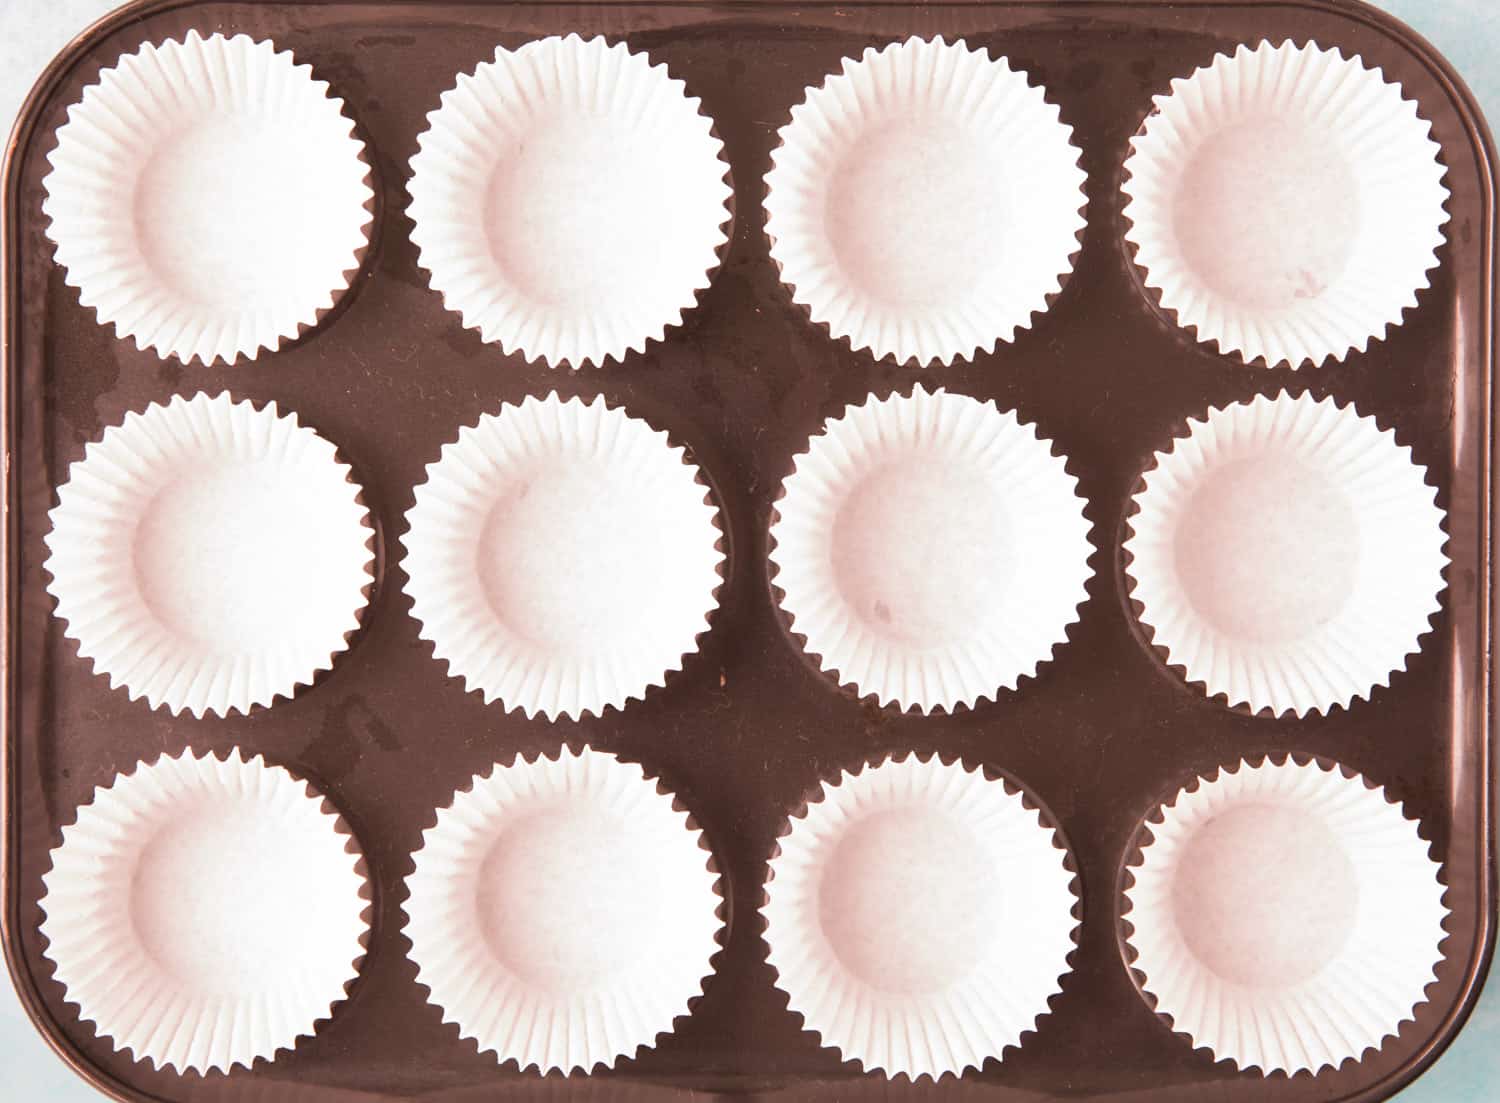 A 12 hole cupcake tray lined with 12 white cupcake cases